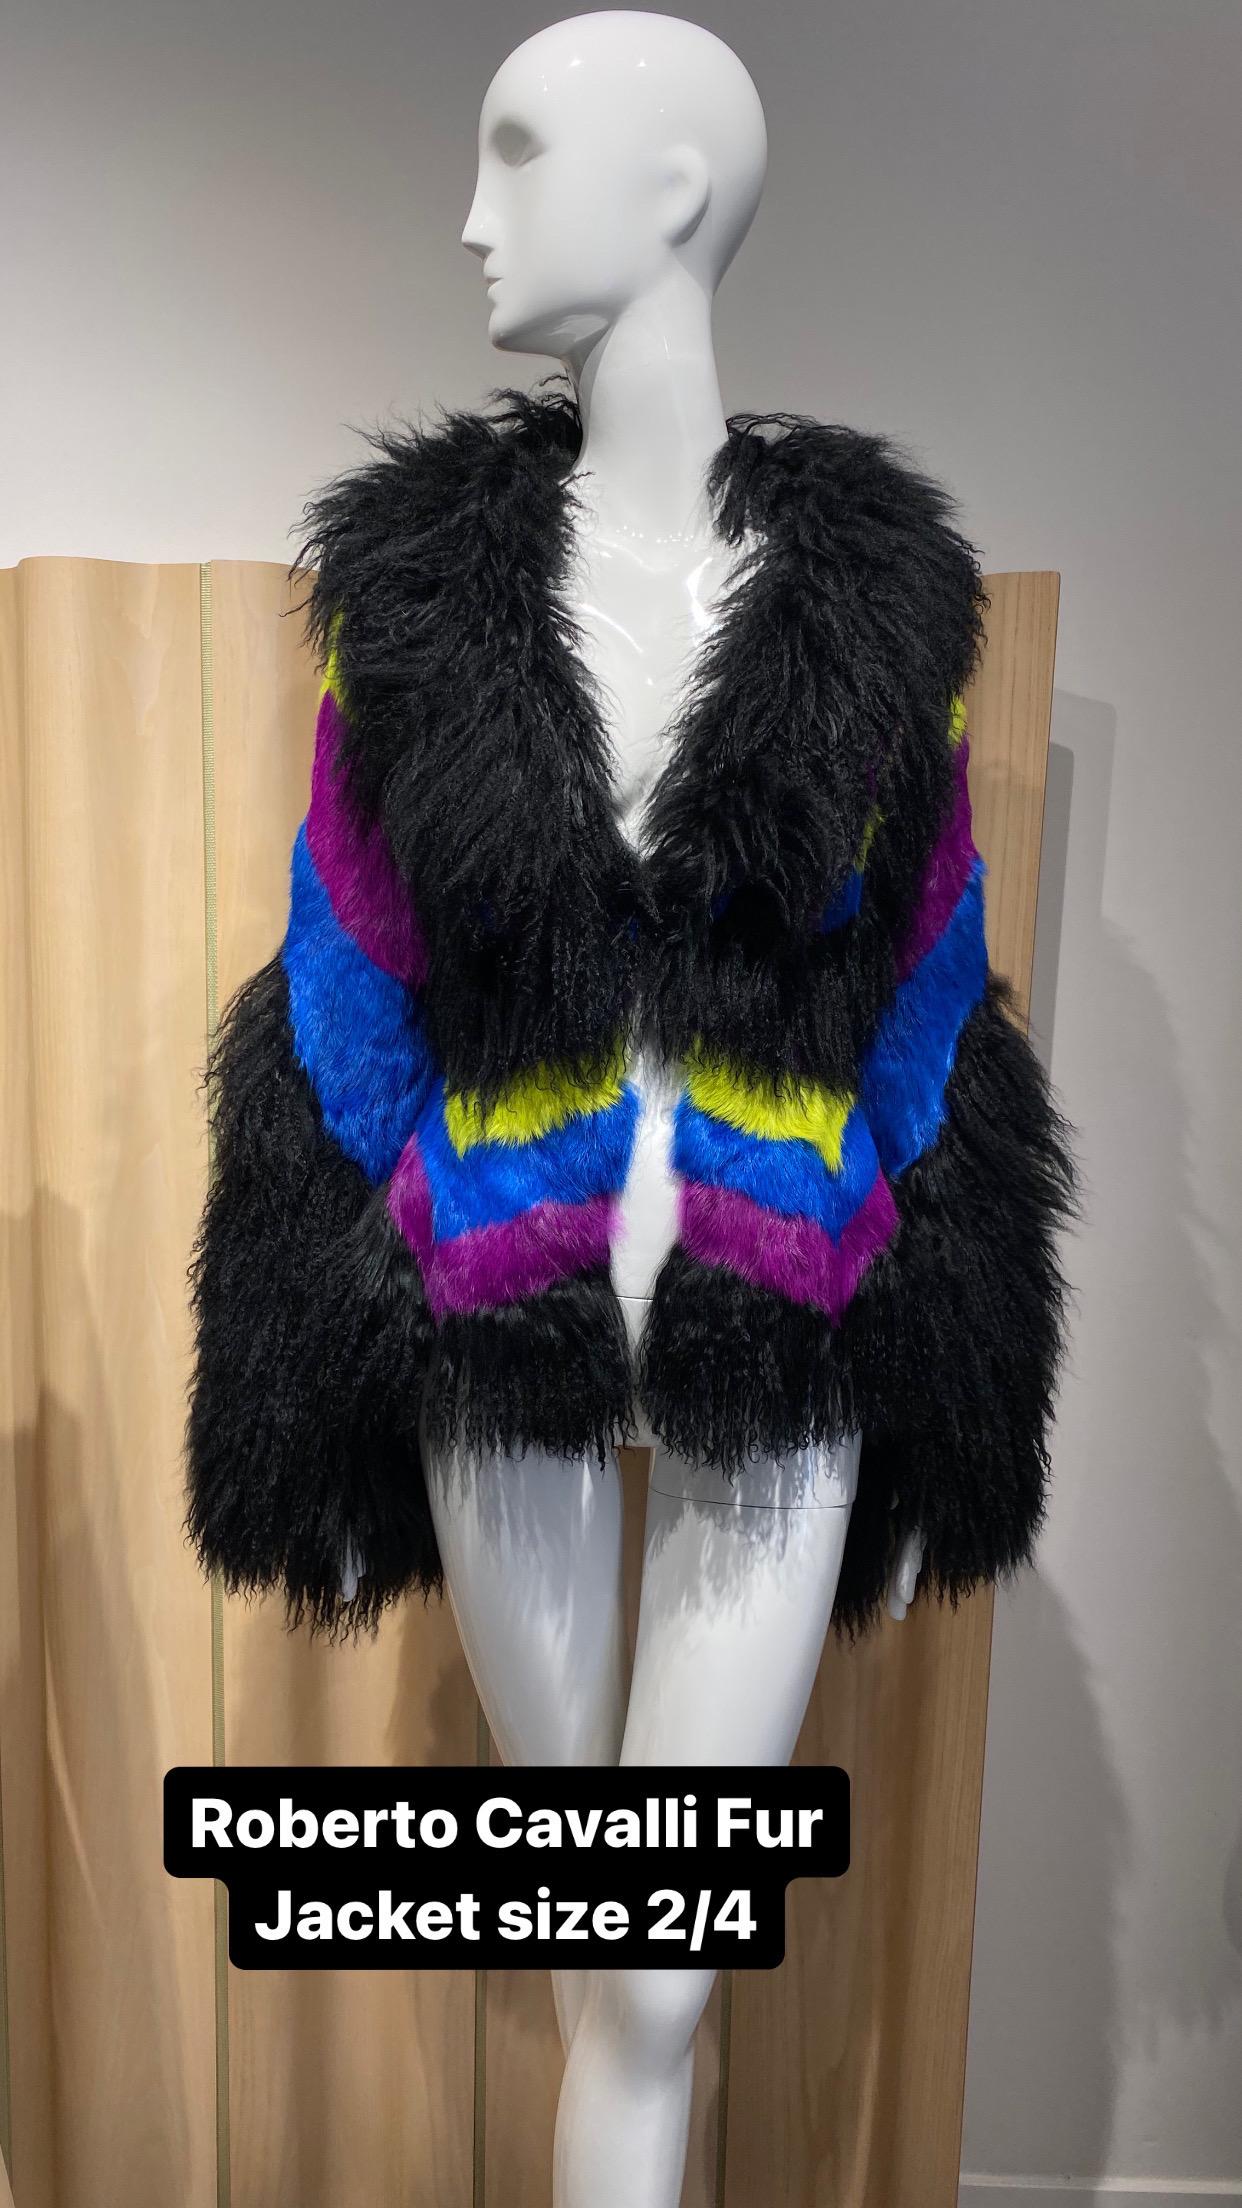 Vintage Roberto Cavalli Fur fitted Jacket in blue , green, purple and black.
Fit size 0/2/4
